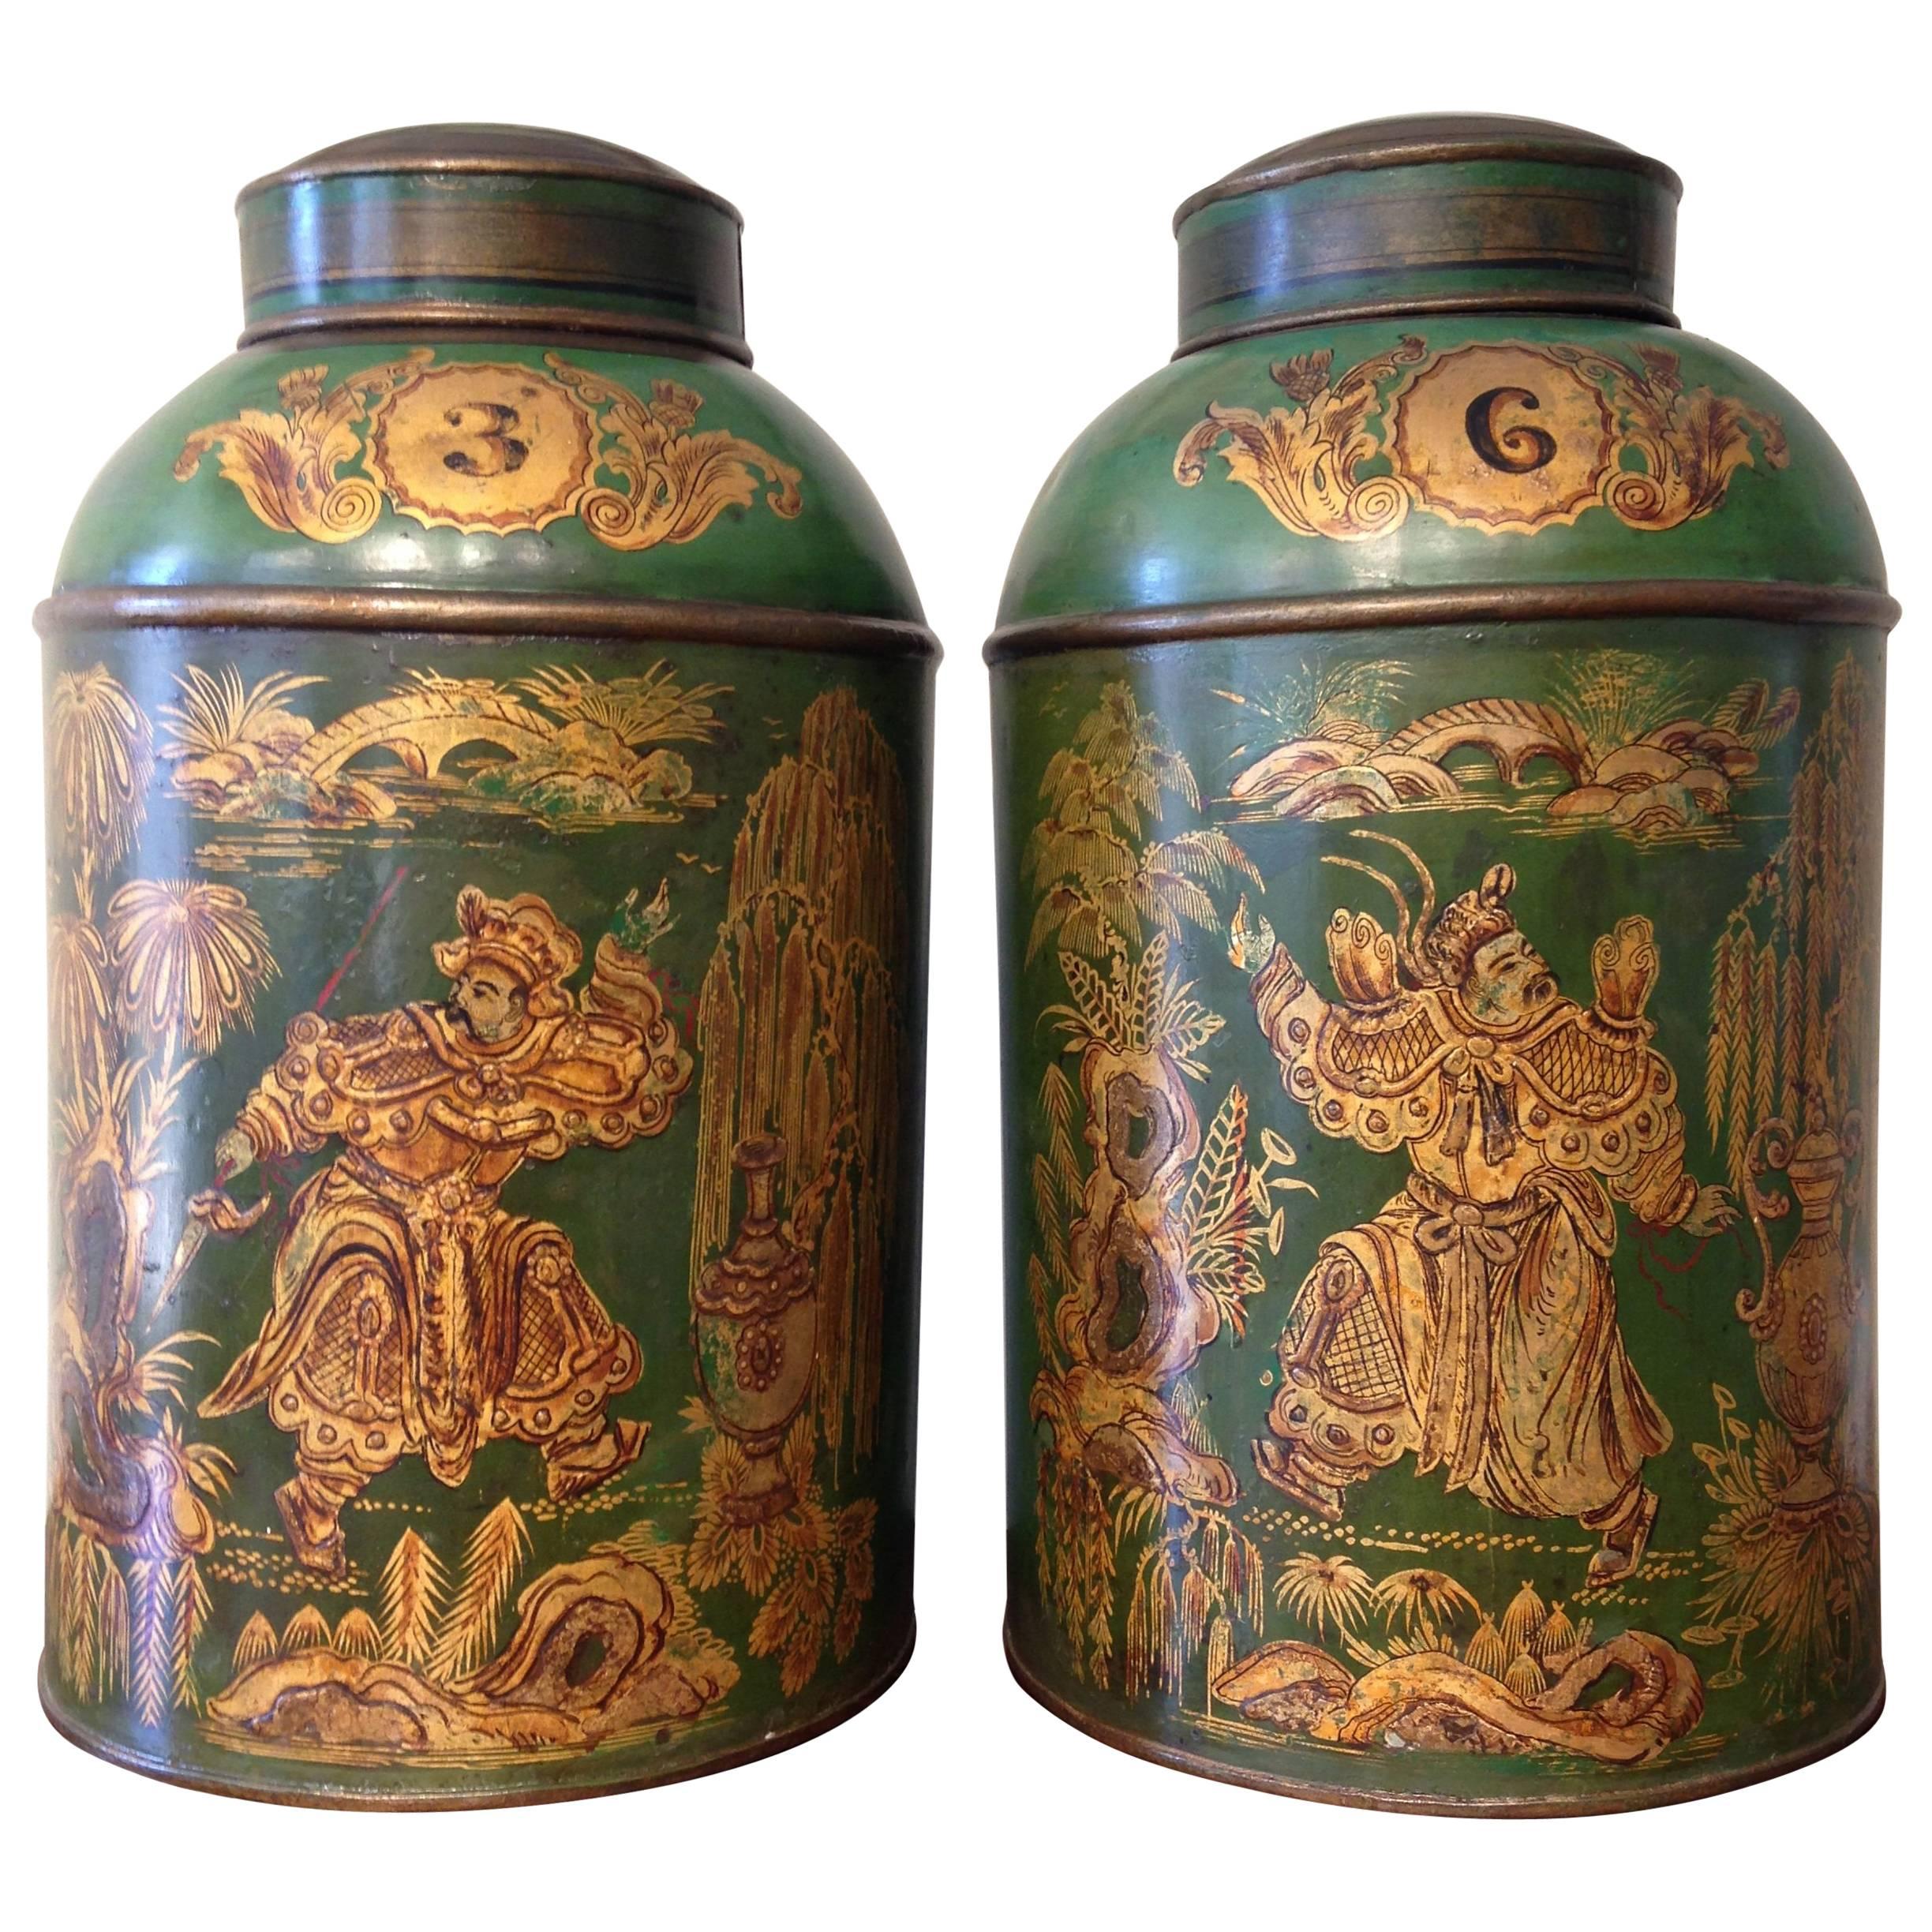 Large Tole Tea Canisters